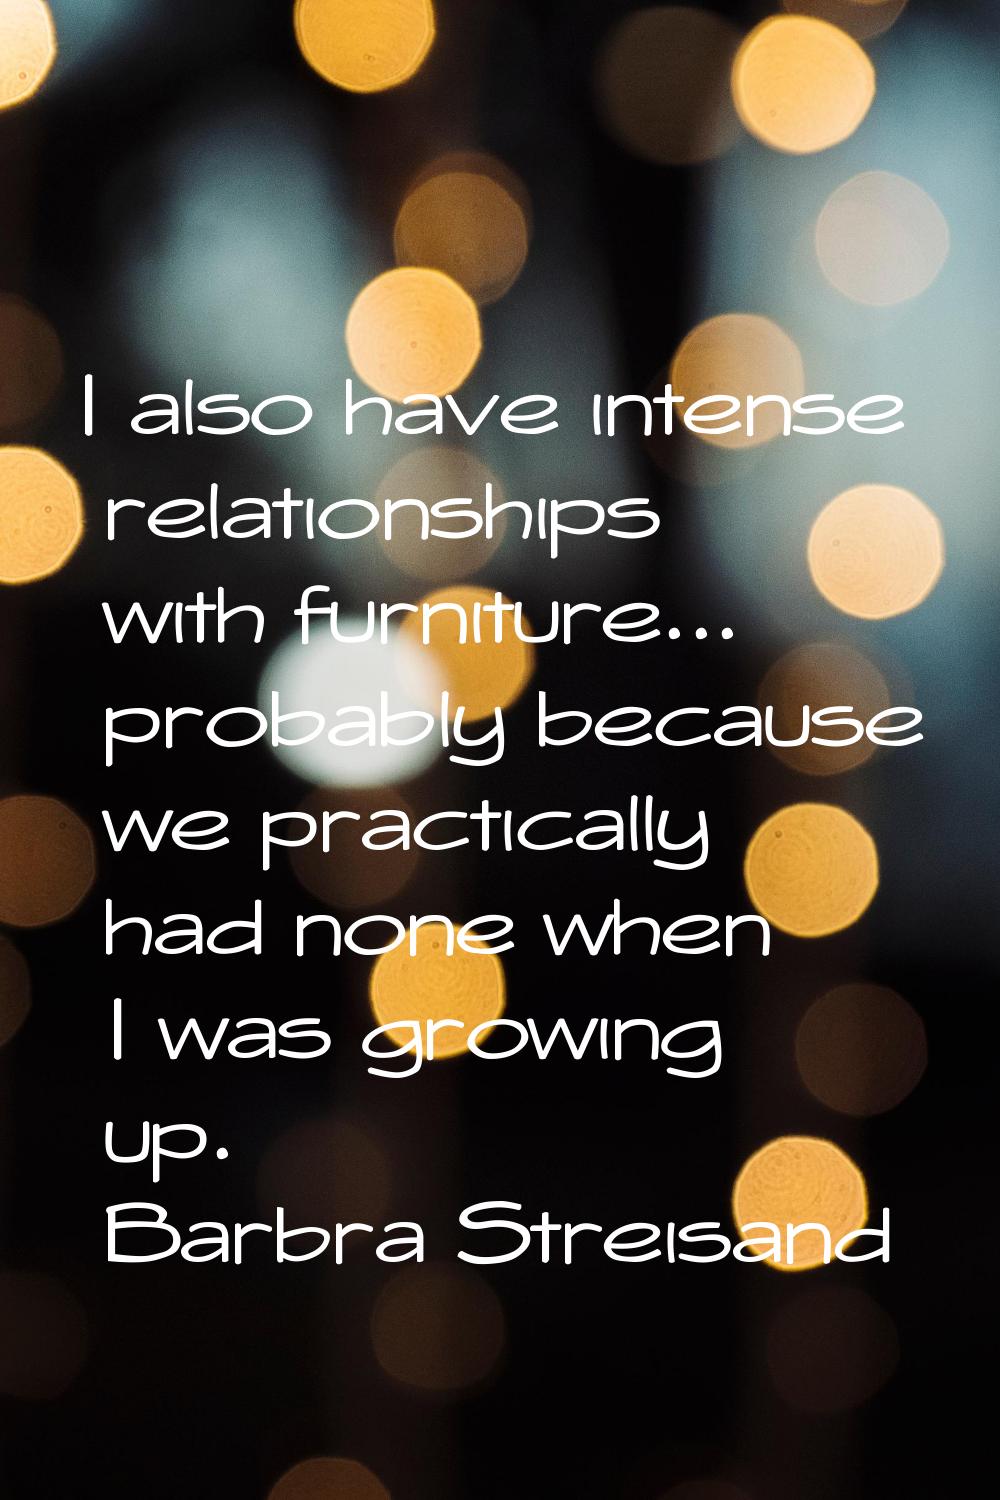 I also have intense relationships with furniture... probably because we practically had none when I